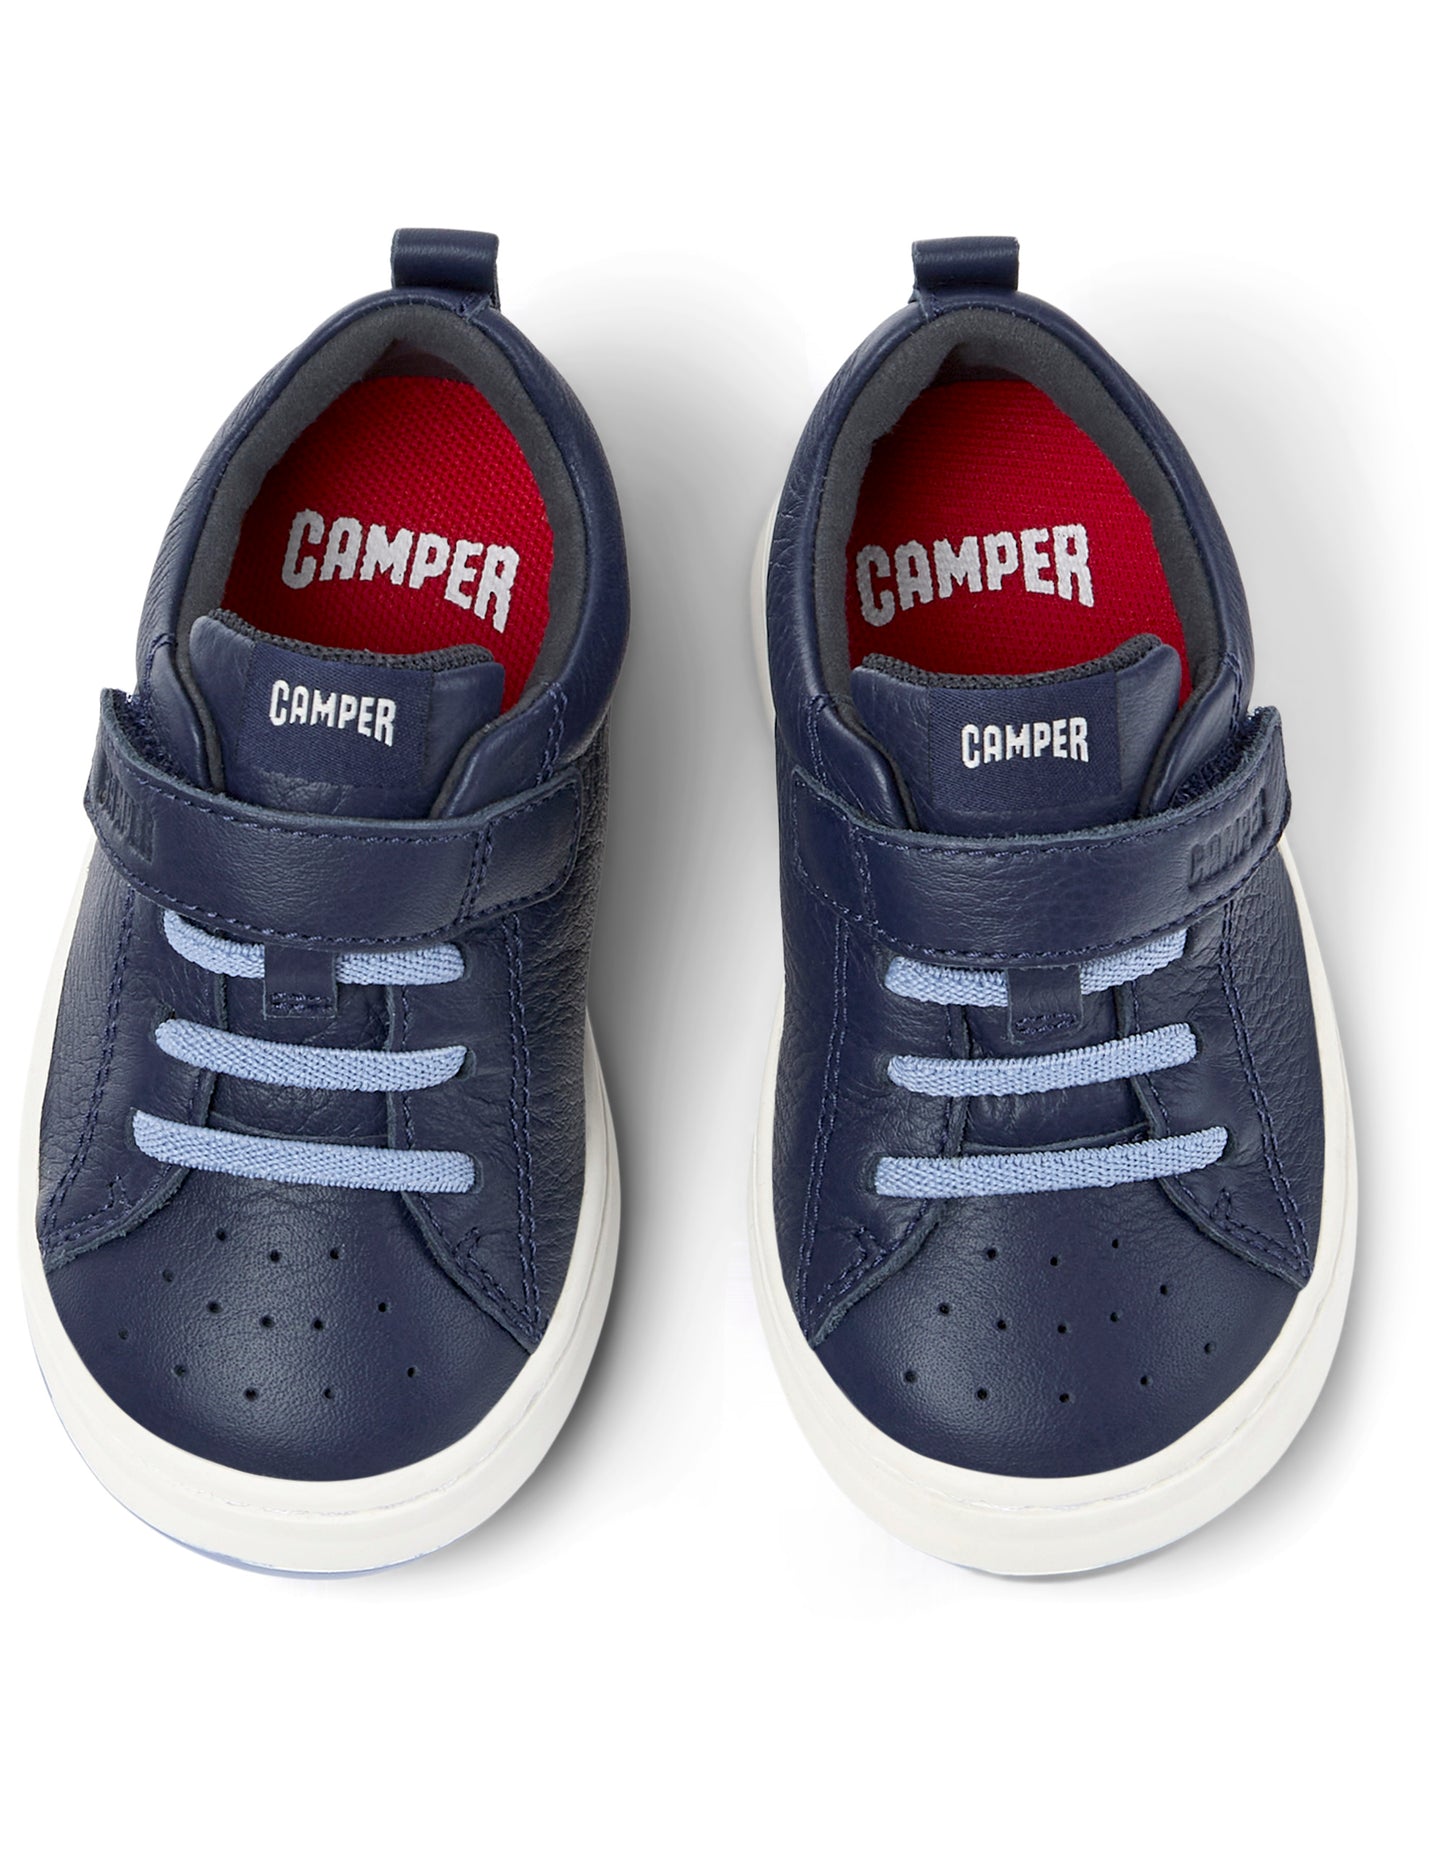 A boys shoe by Camper, style Runner FW, in navy with velcro strap and light blue elastic laces. Above view of a pair.